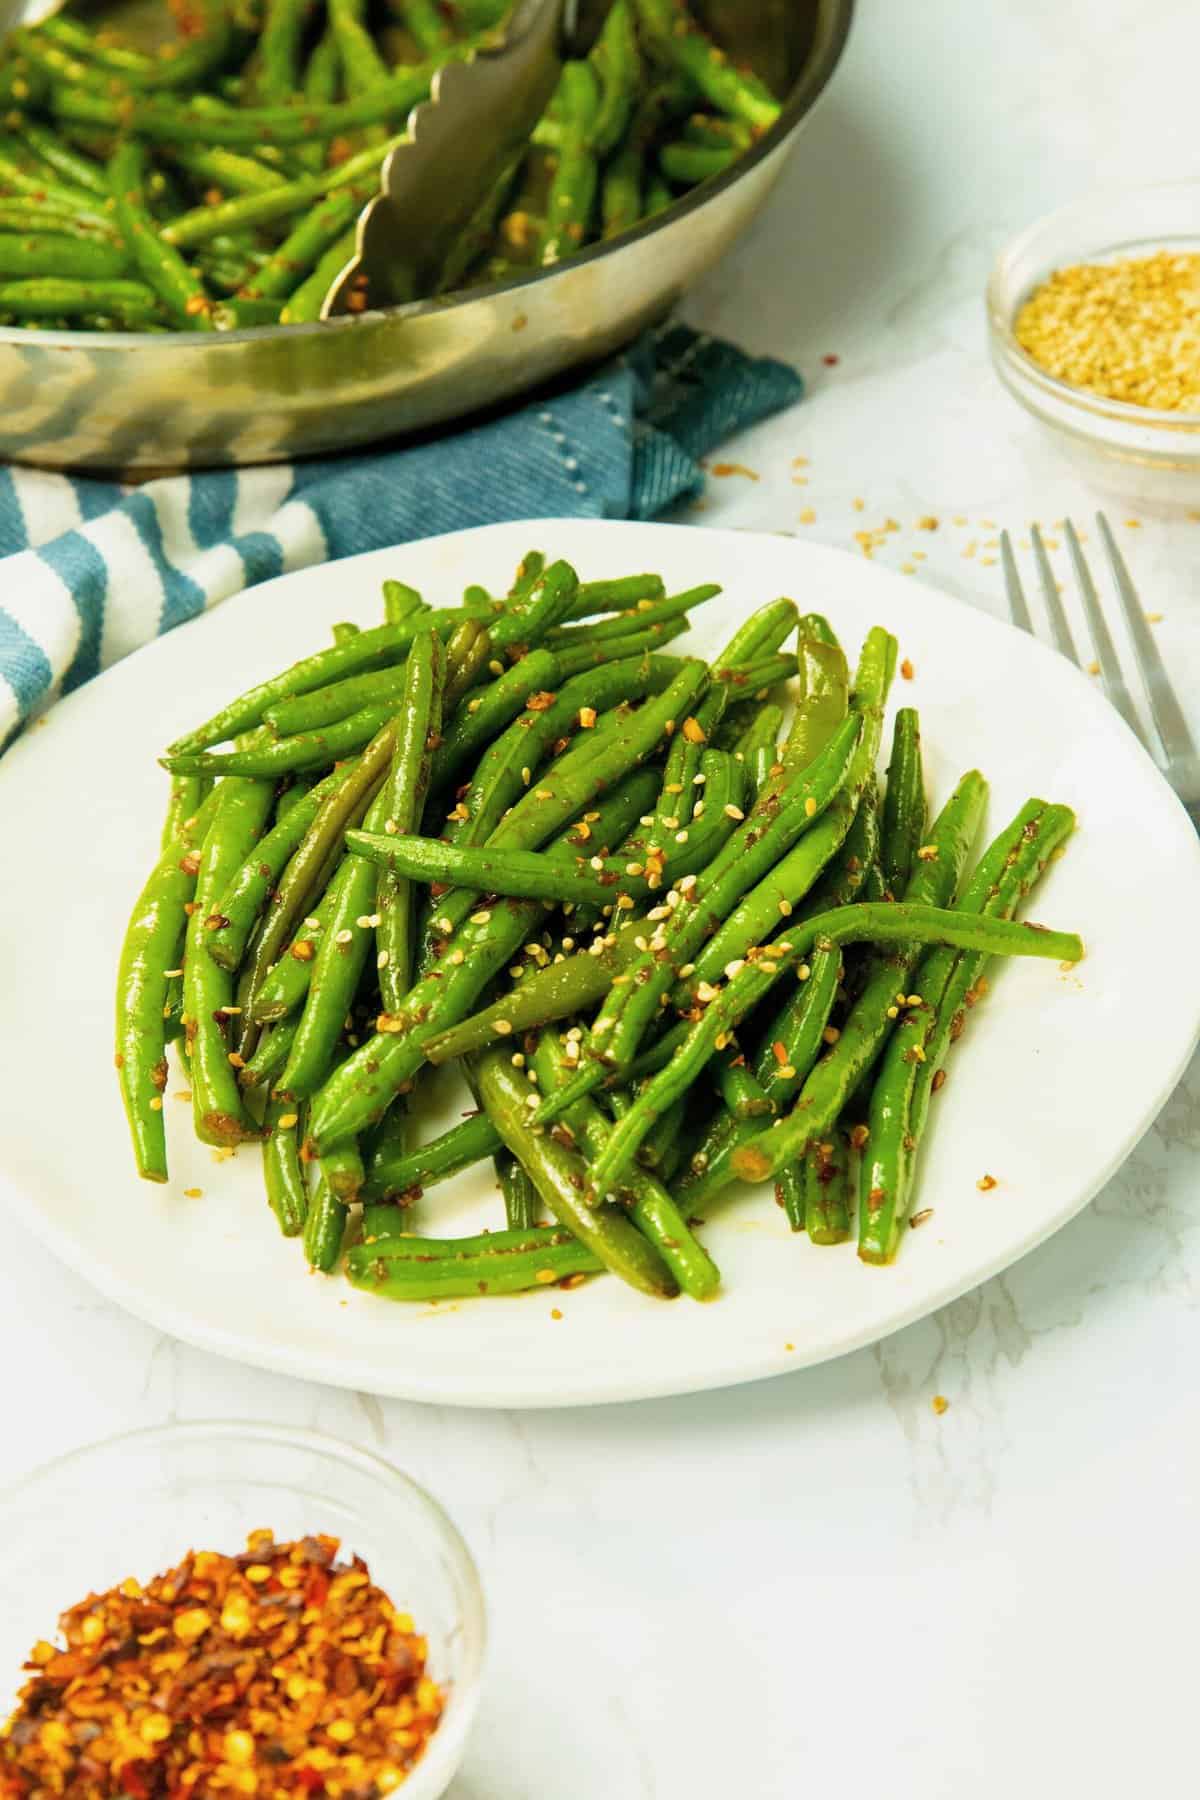 A plateful of deliciously seasoned spicy green beans to enjoy